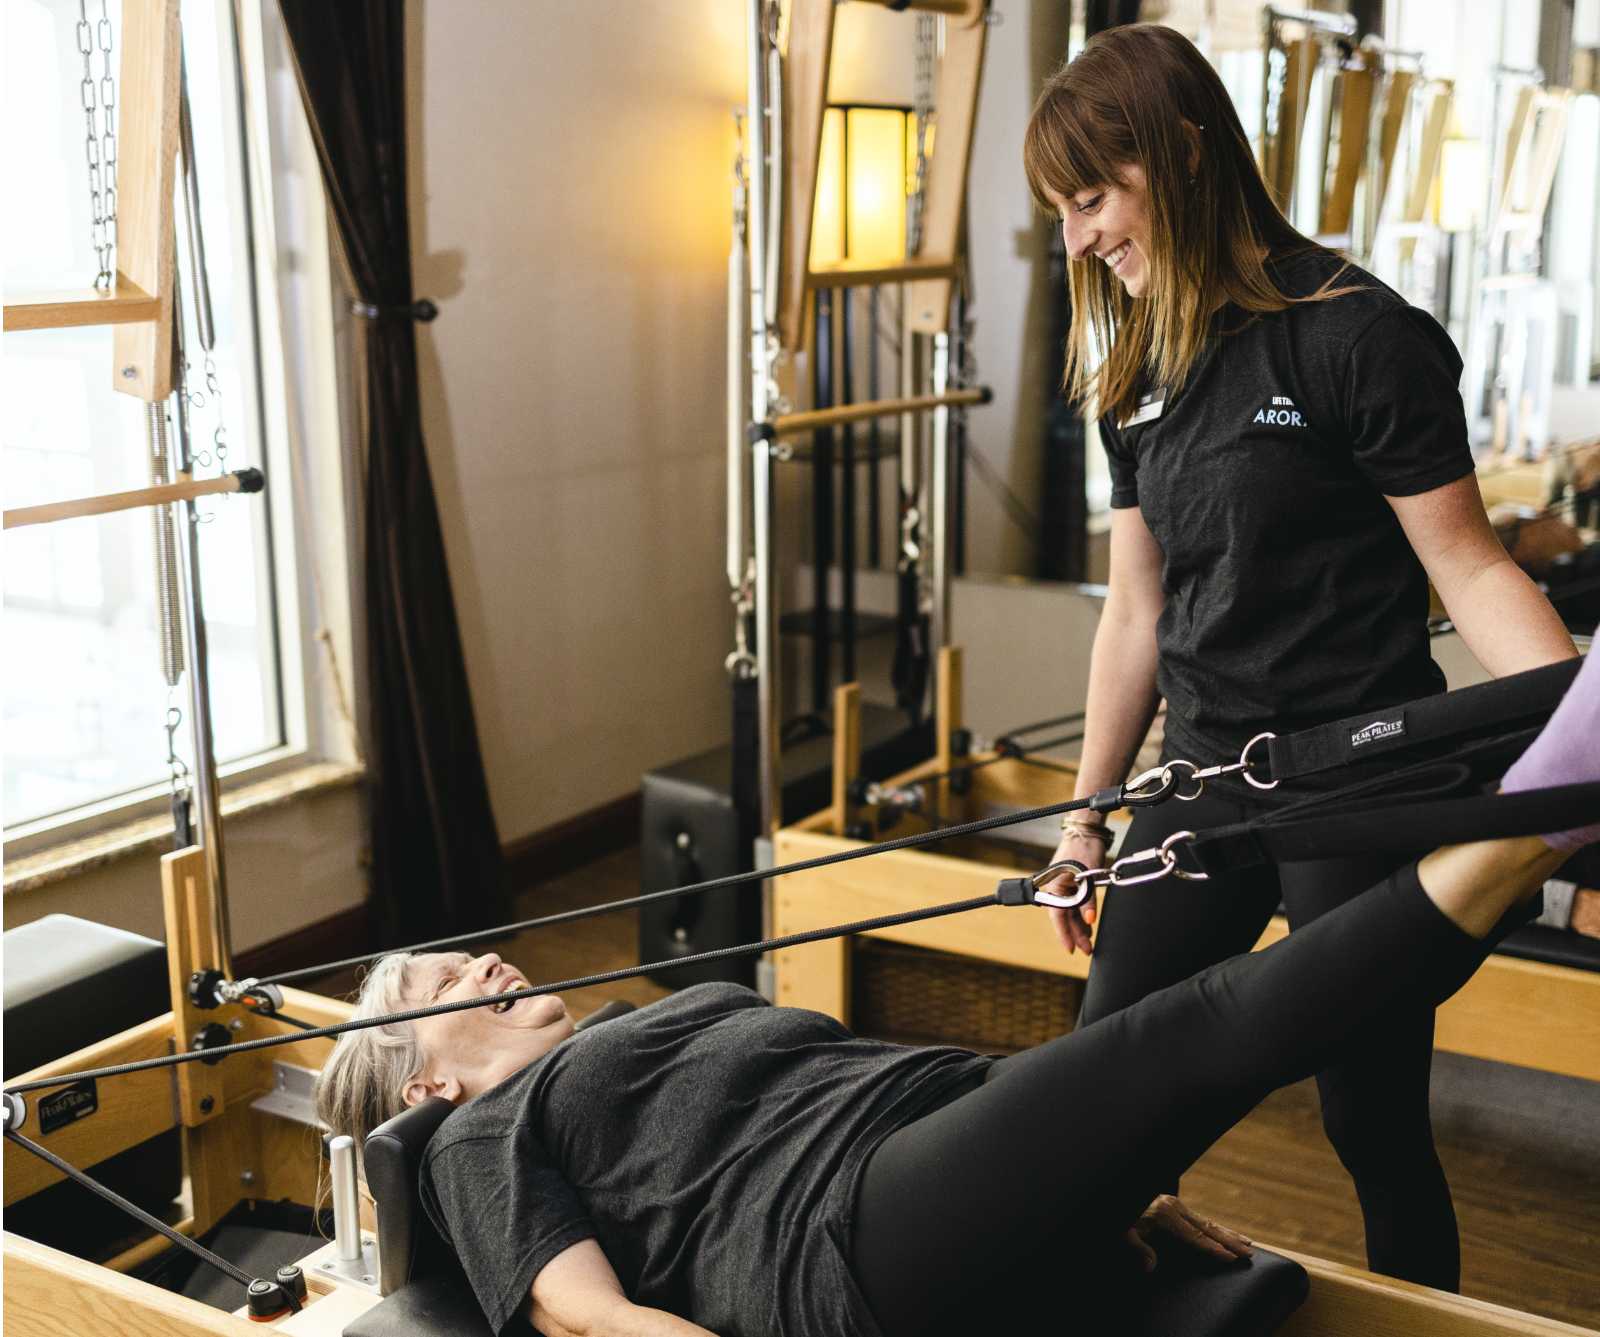 A pilates instructor helps a woman perform a movement on the pilates reformer machine